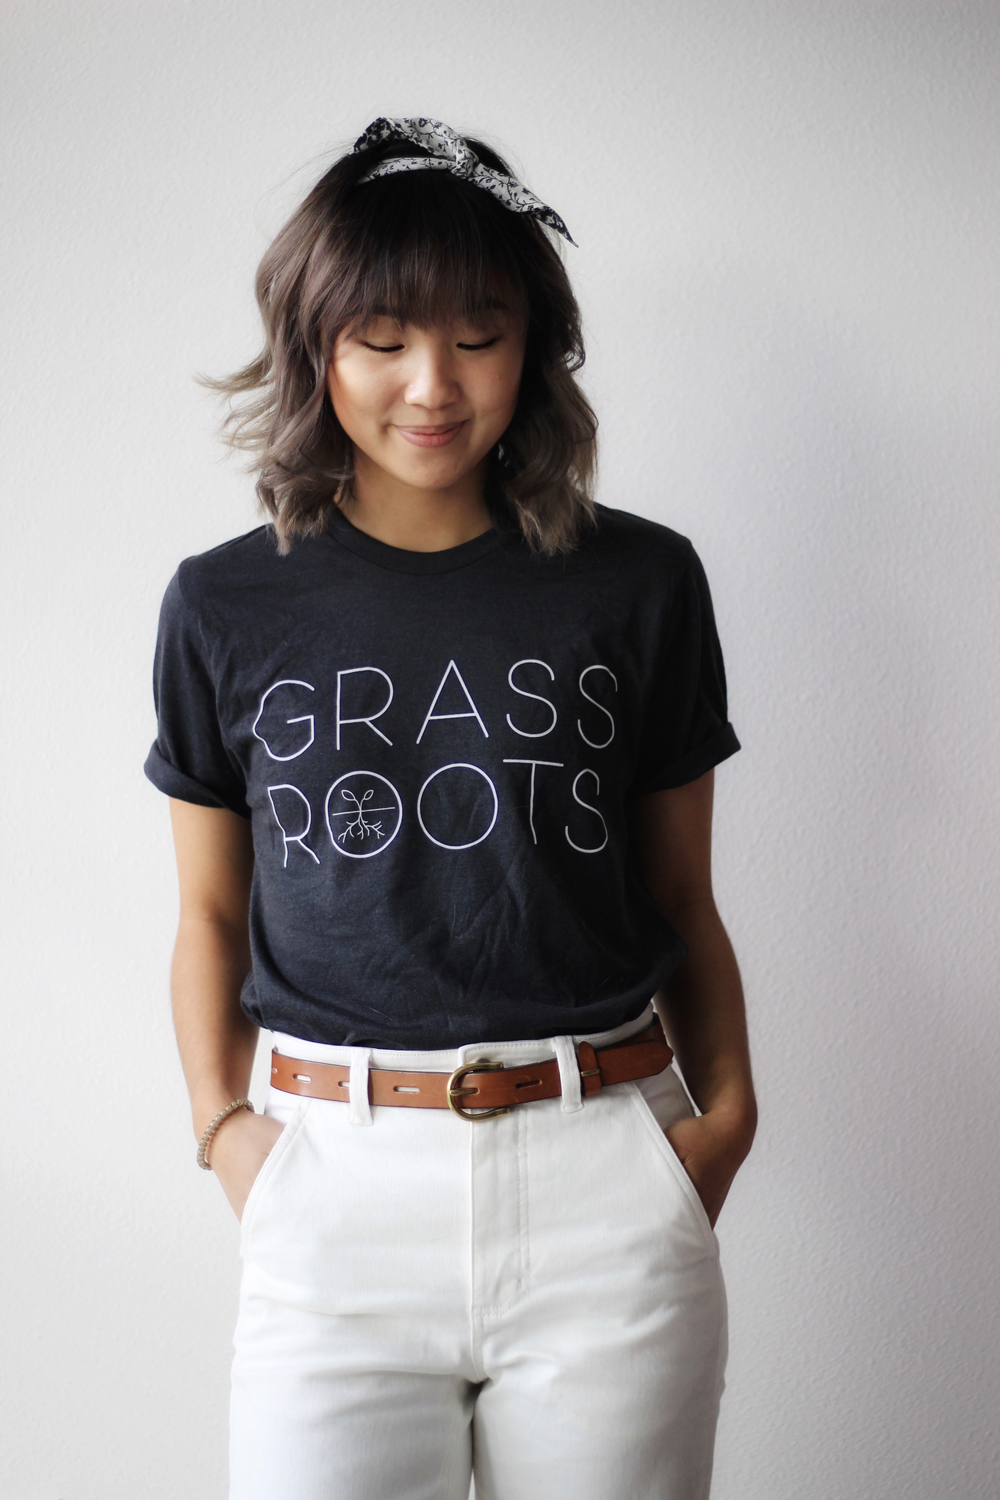 Grassroots monthly donor shirt